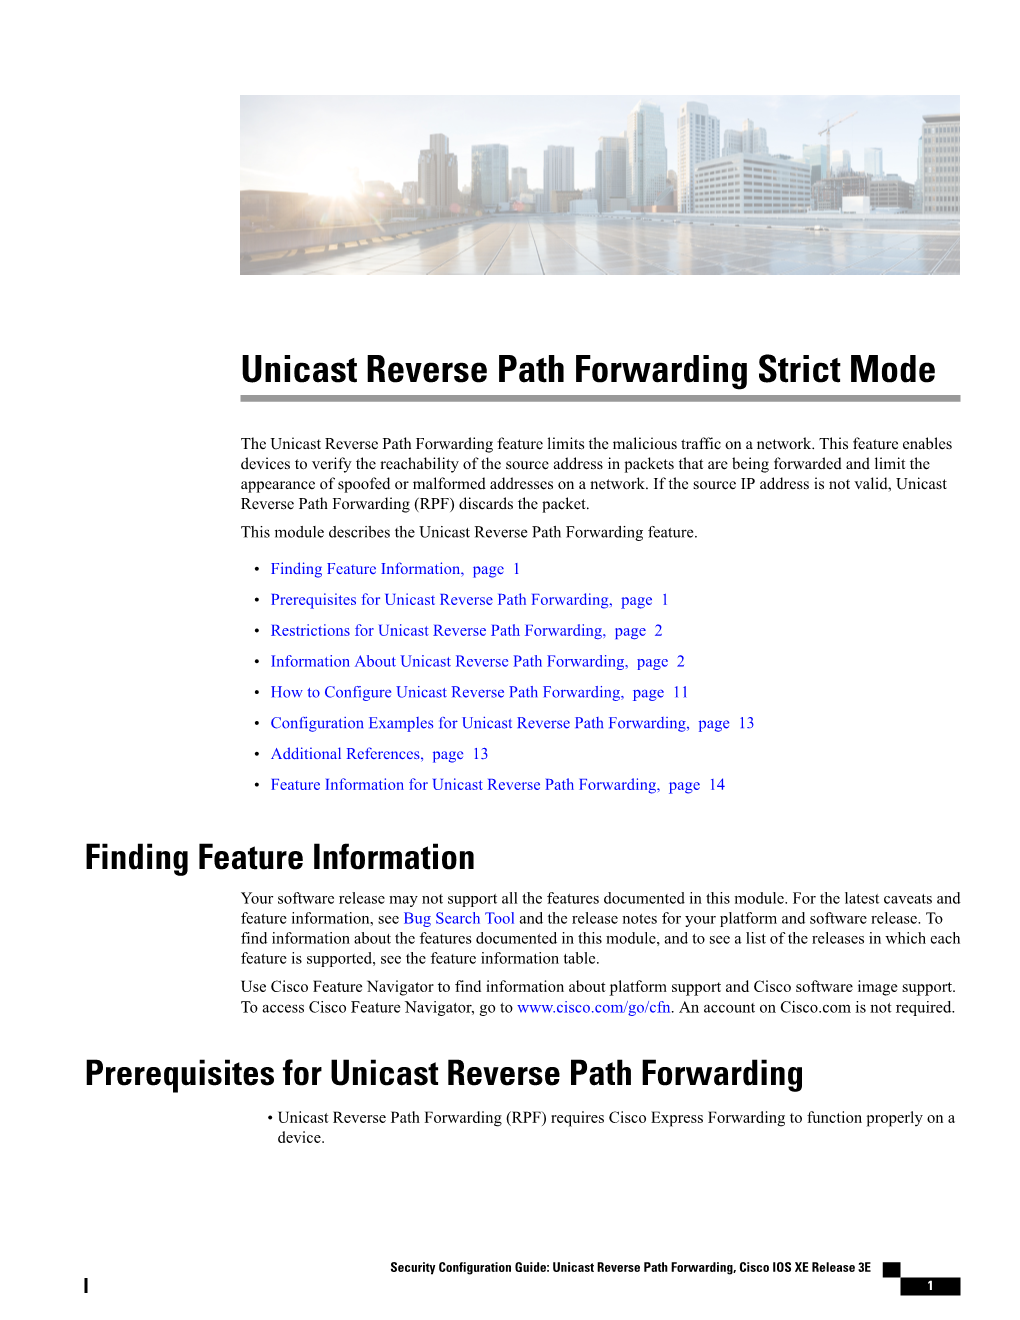 Unicast Reverse Path Forwarding Strict Mode